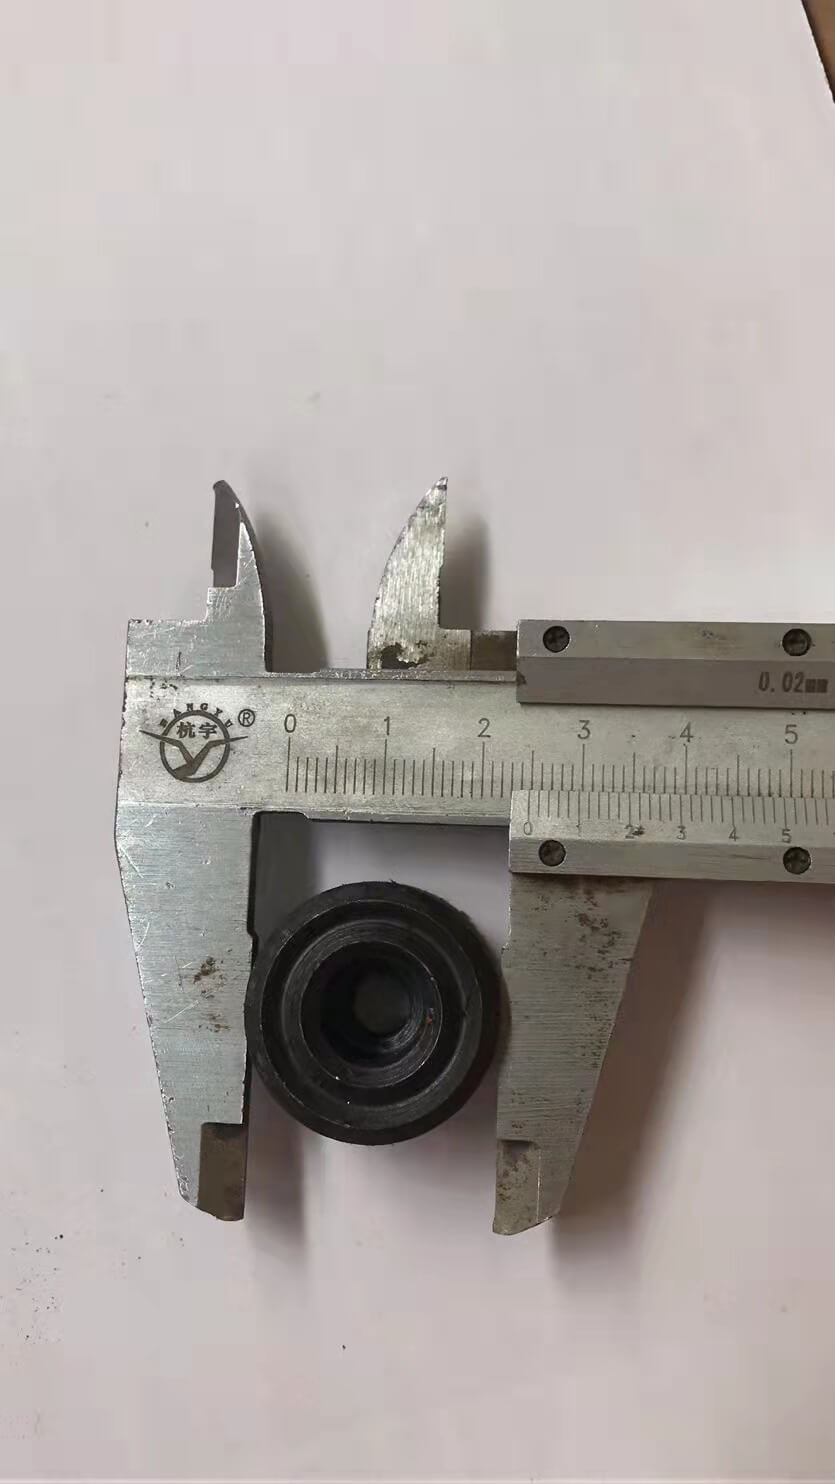 New Part with diameter 25mm of Lifting Clamp – Vertical for replacement-1.jpg